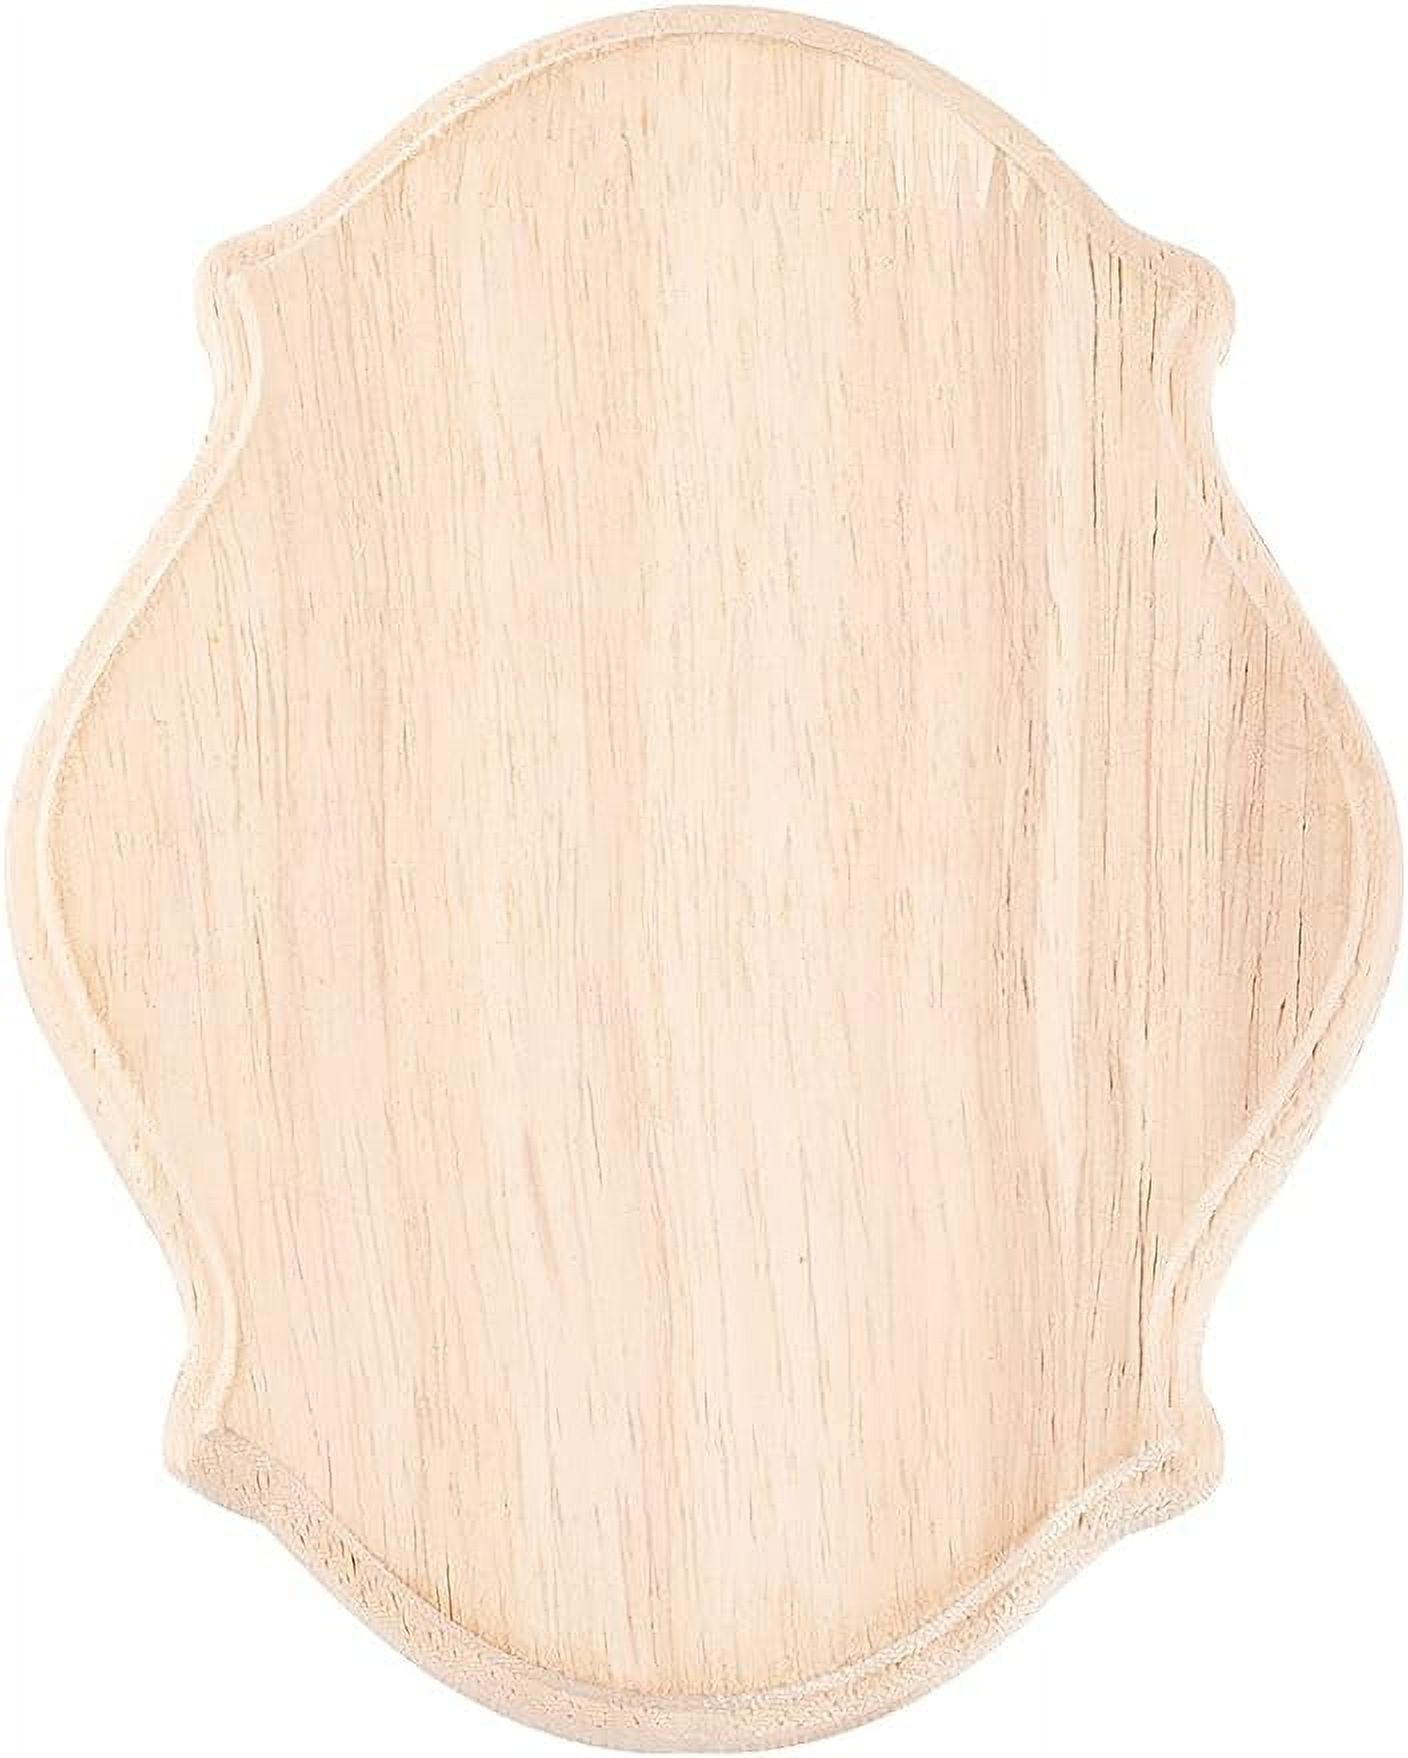 Unfinished Wood Plaque 5.9x4.8x0.7inch Oval Wooden Blank Signboards Natural Wood  Crafts for Painting Carving Burning Wood Boards for DIY Craft Projects Home  Decoration 